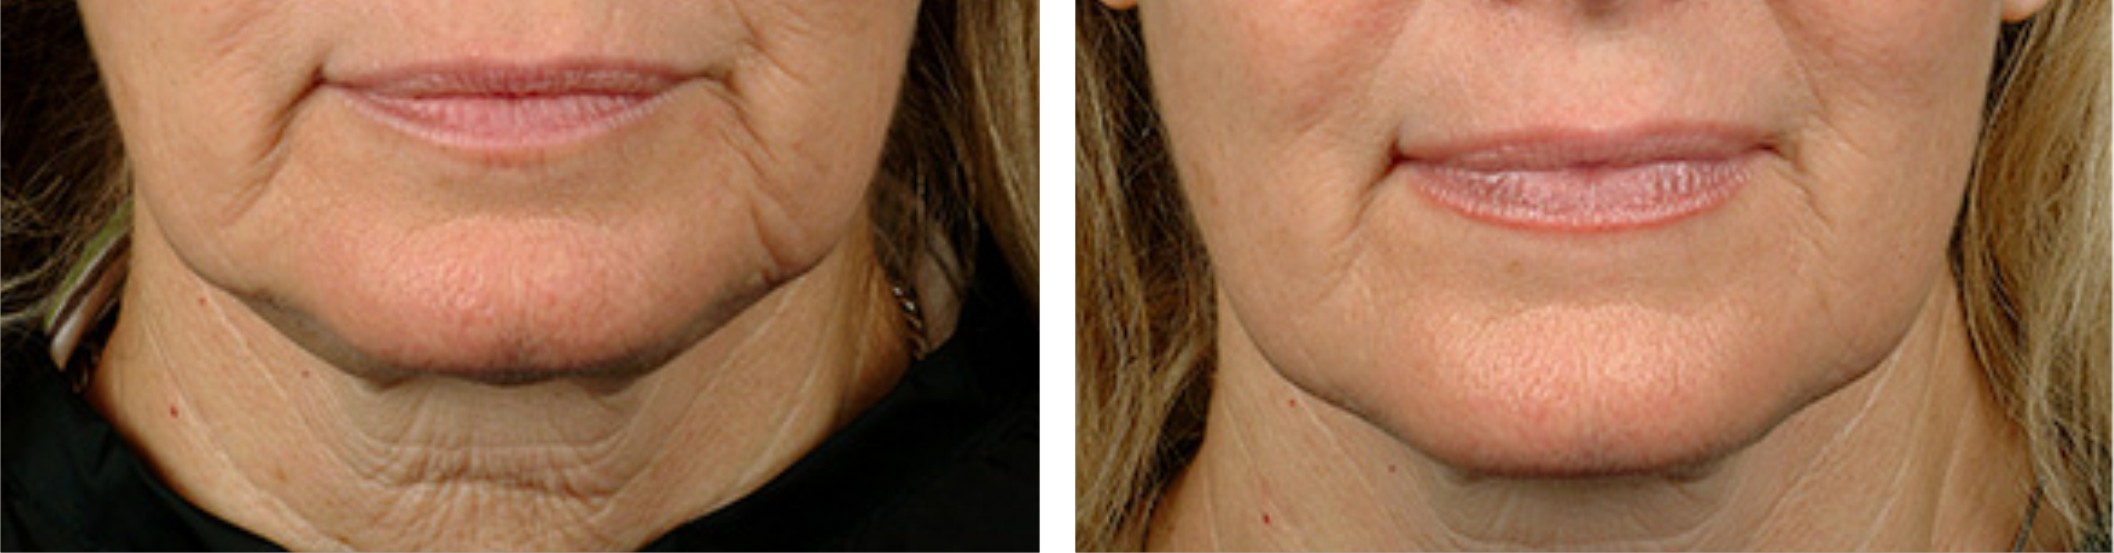 Radio Frequency Skin Tightening (RF) Image Two